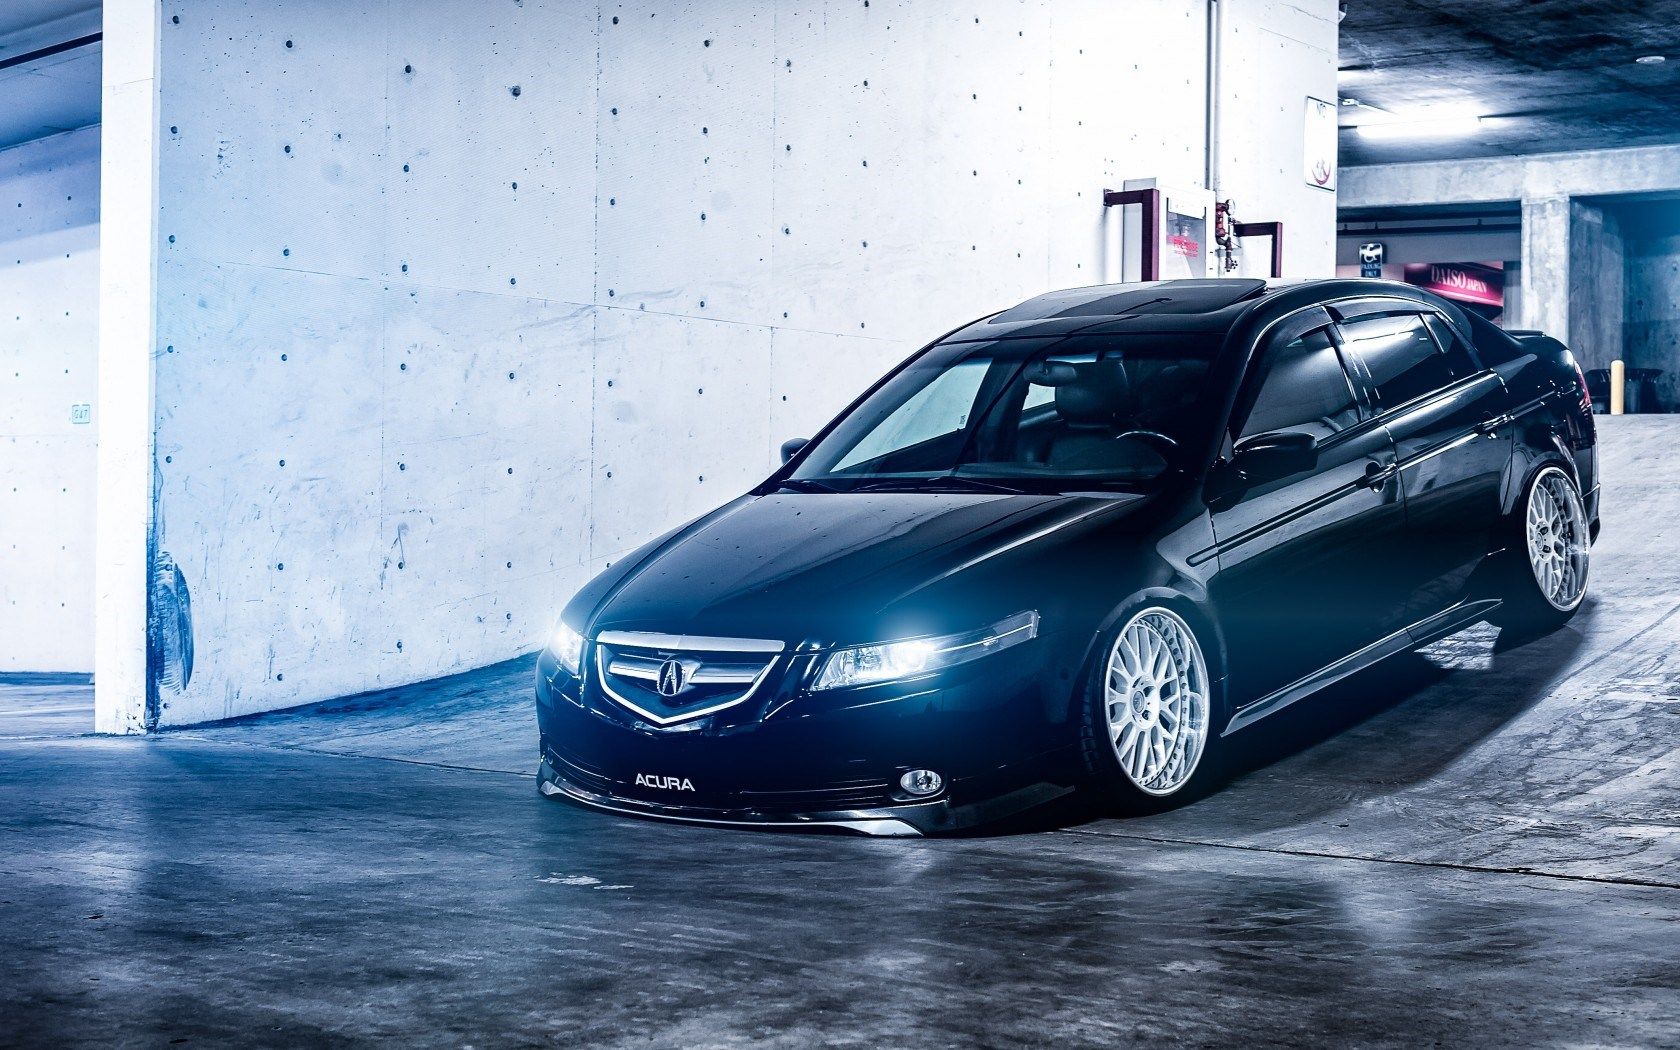 HD wallpaper, Tsx, Acura, Pictures